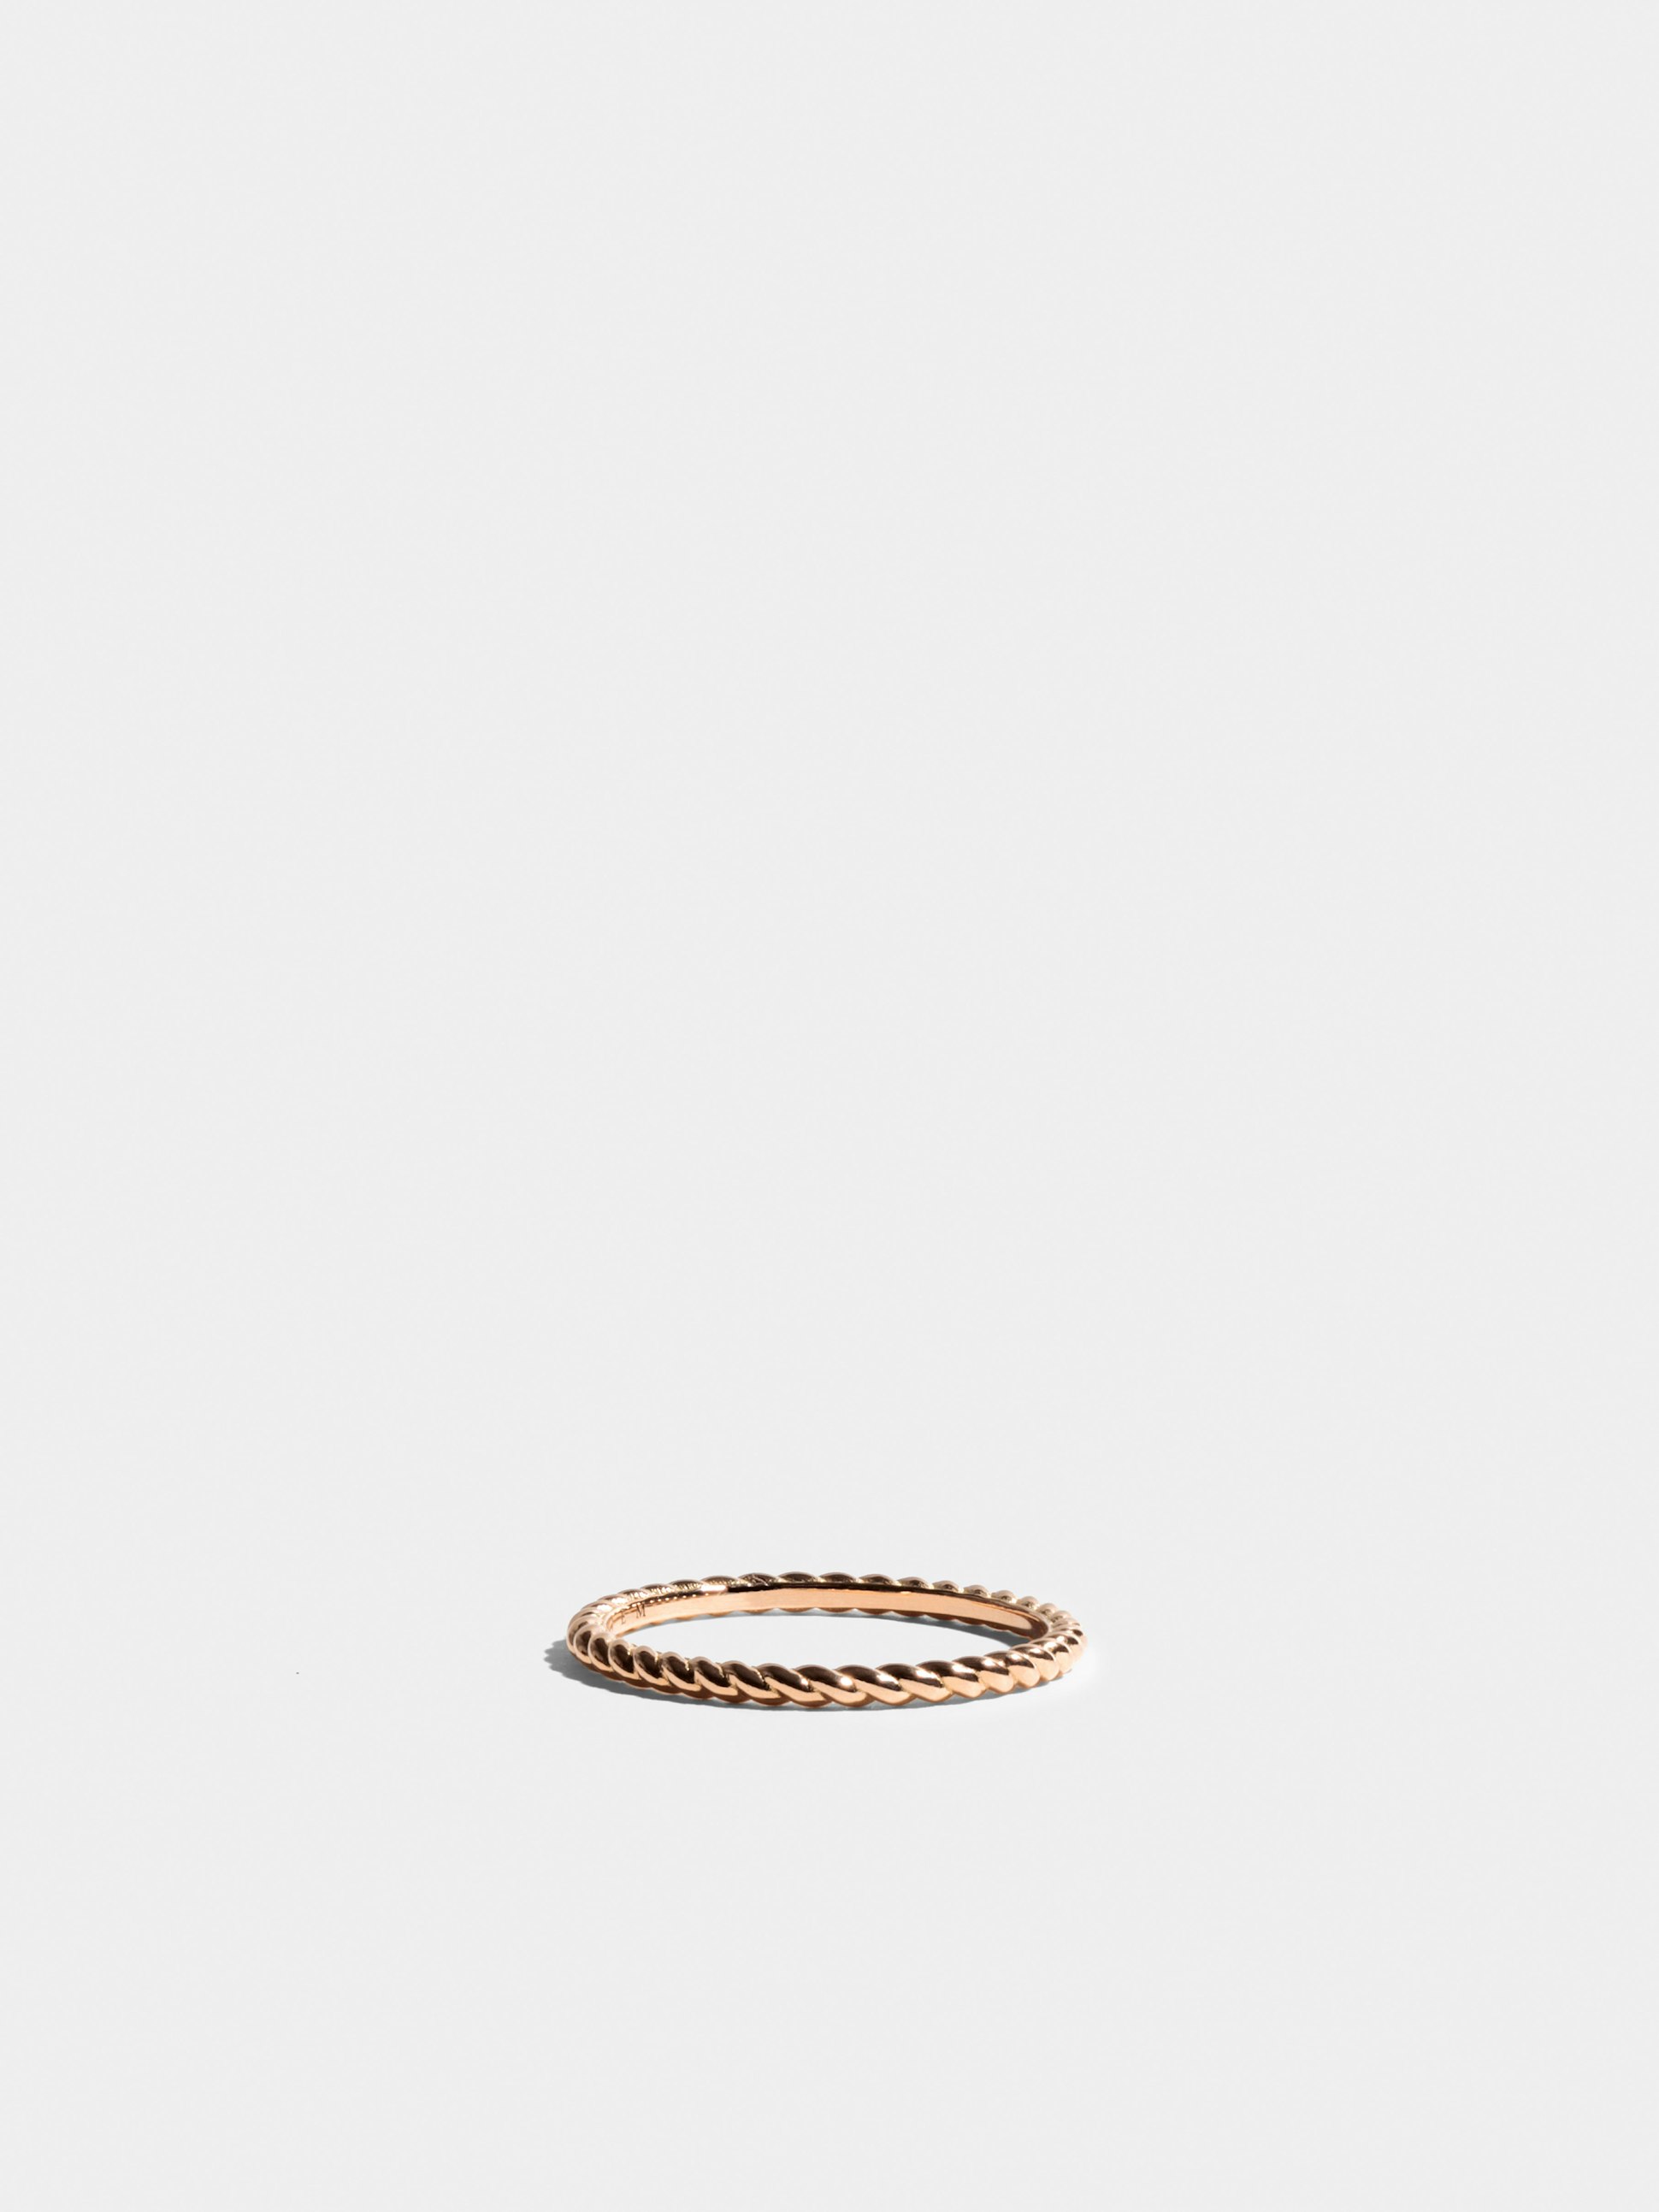 Anagramme twisted ring in 18k Fairmined ethical rose gold